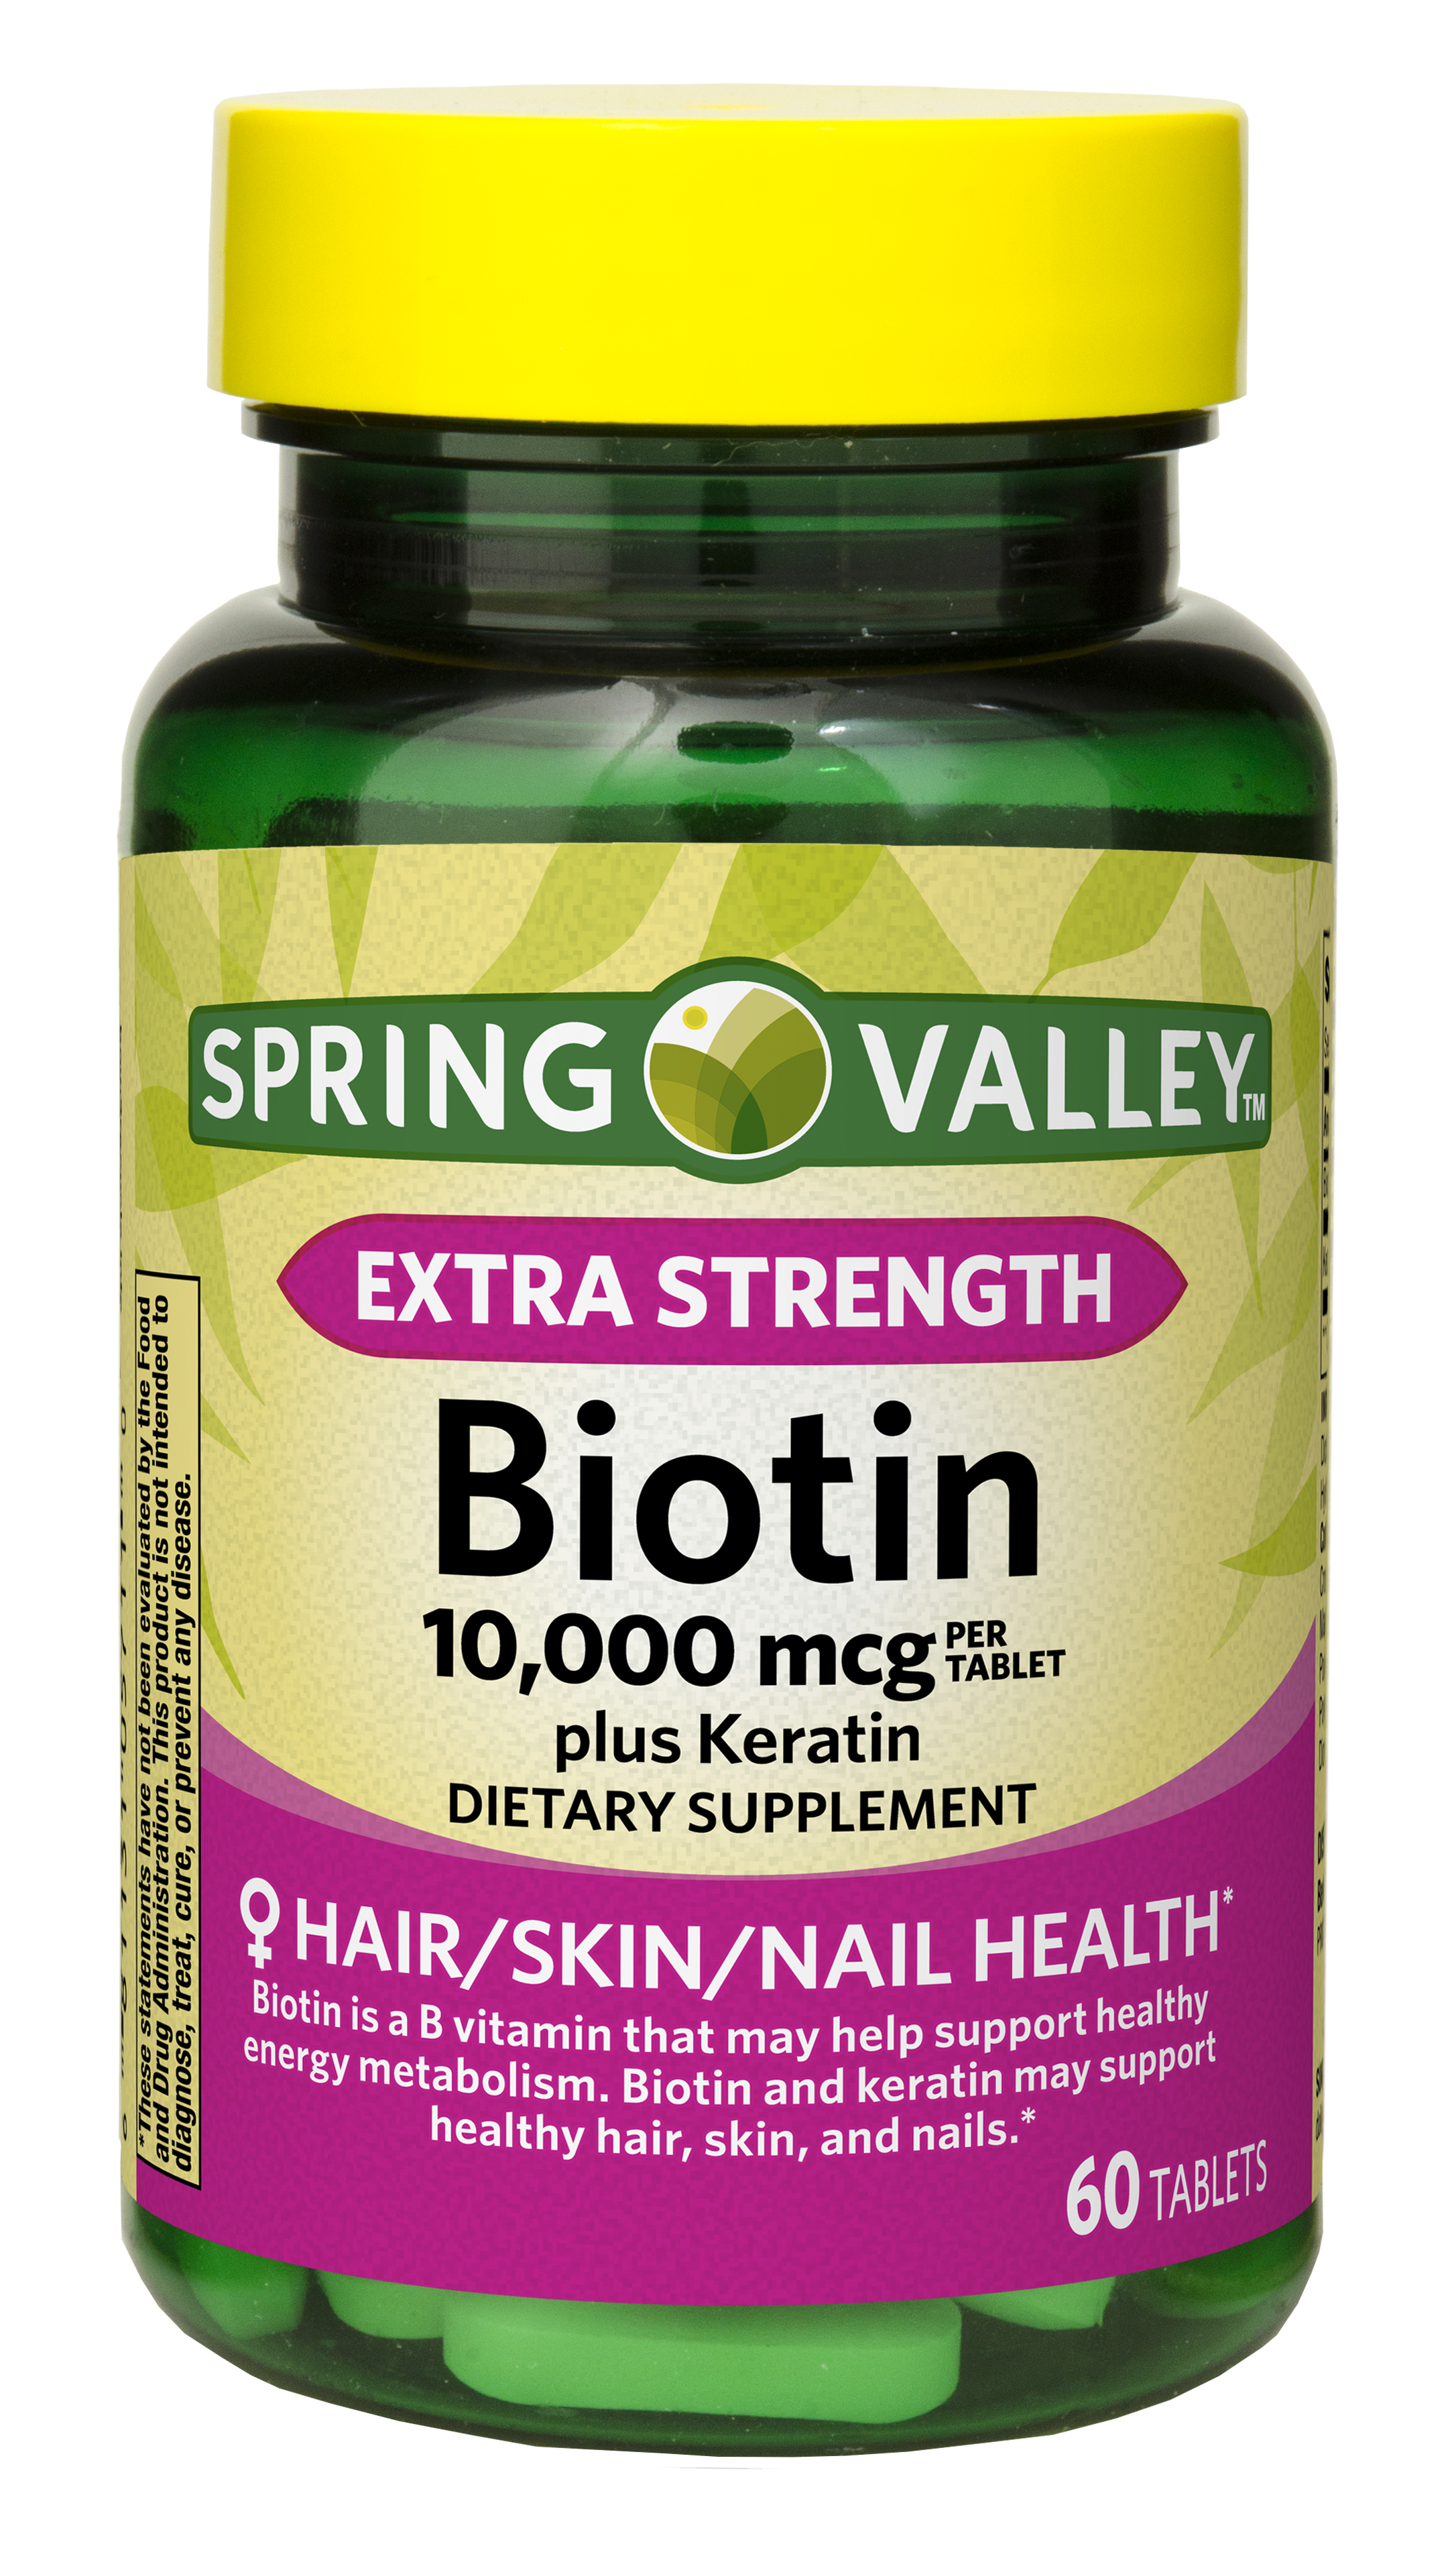 Spring Valley Extra Strength Biotin Plus Keratin Tablets Dietary Supplement, 10,000 Mcg, 60 Count - image 1 of 8